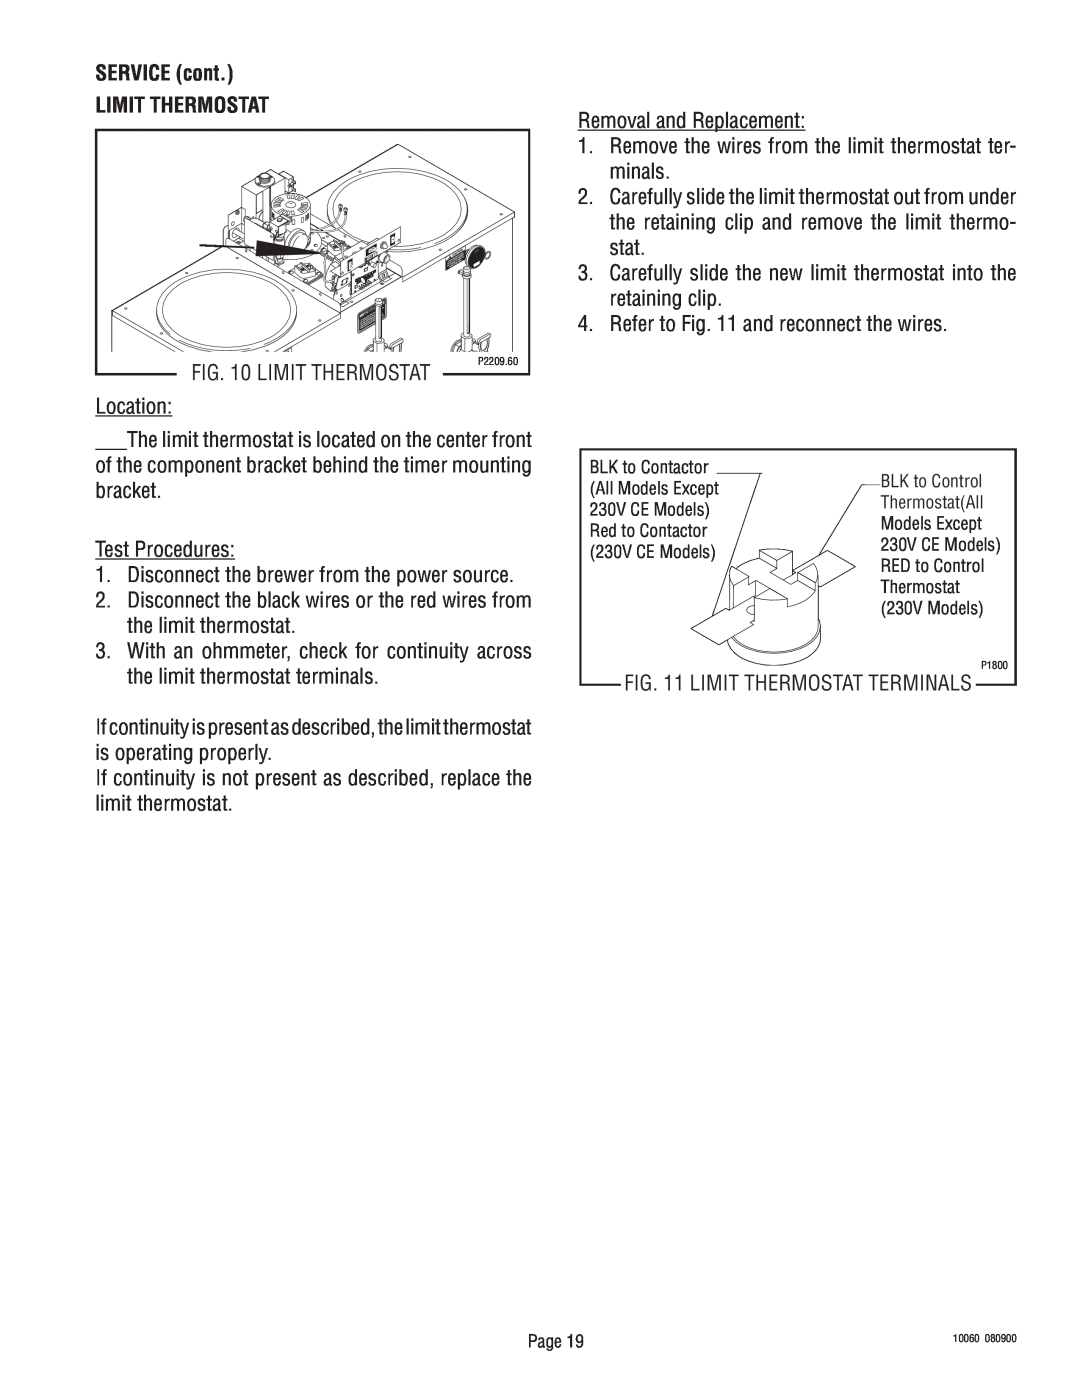 Bunn U3A service manual SERVICE cont LIMIT THERMOSTAT, Disconnect the brewer from the power source 